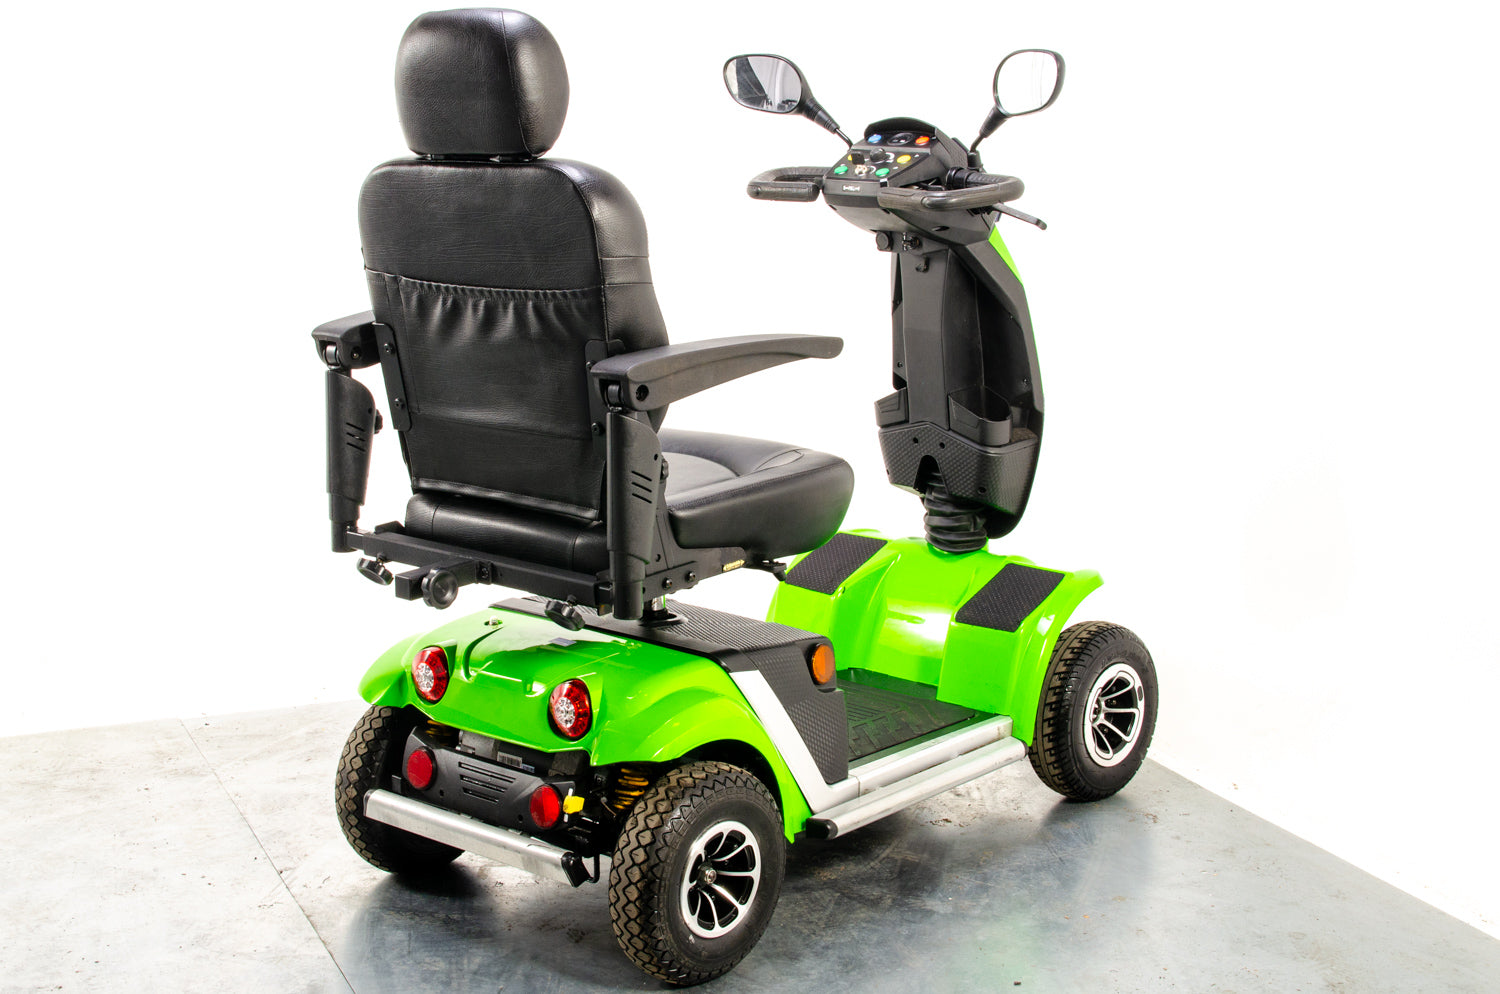 Monarch Vogue Sport Used Mobility Scooter 8mph Road Legal All Terrain Pneumatic Green